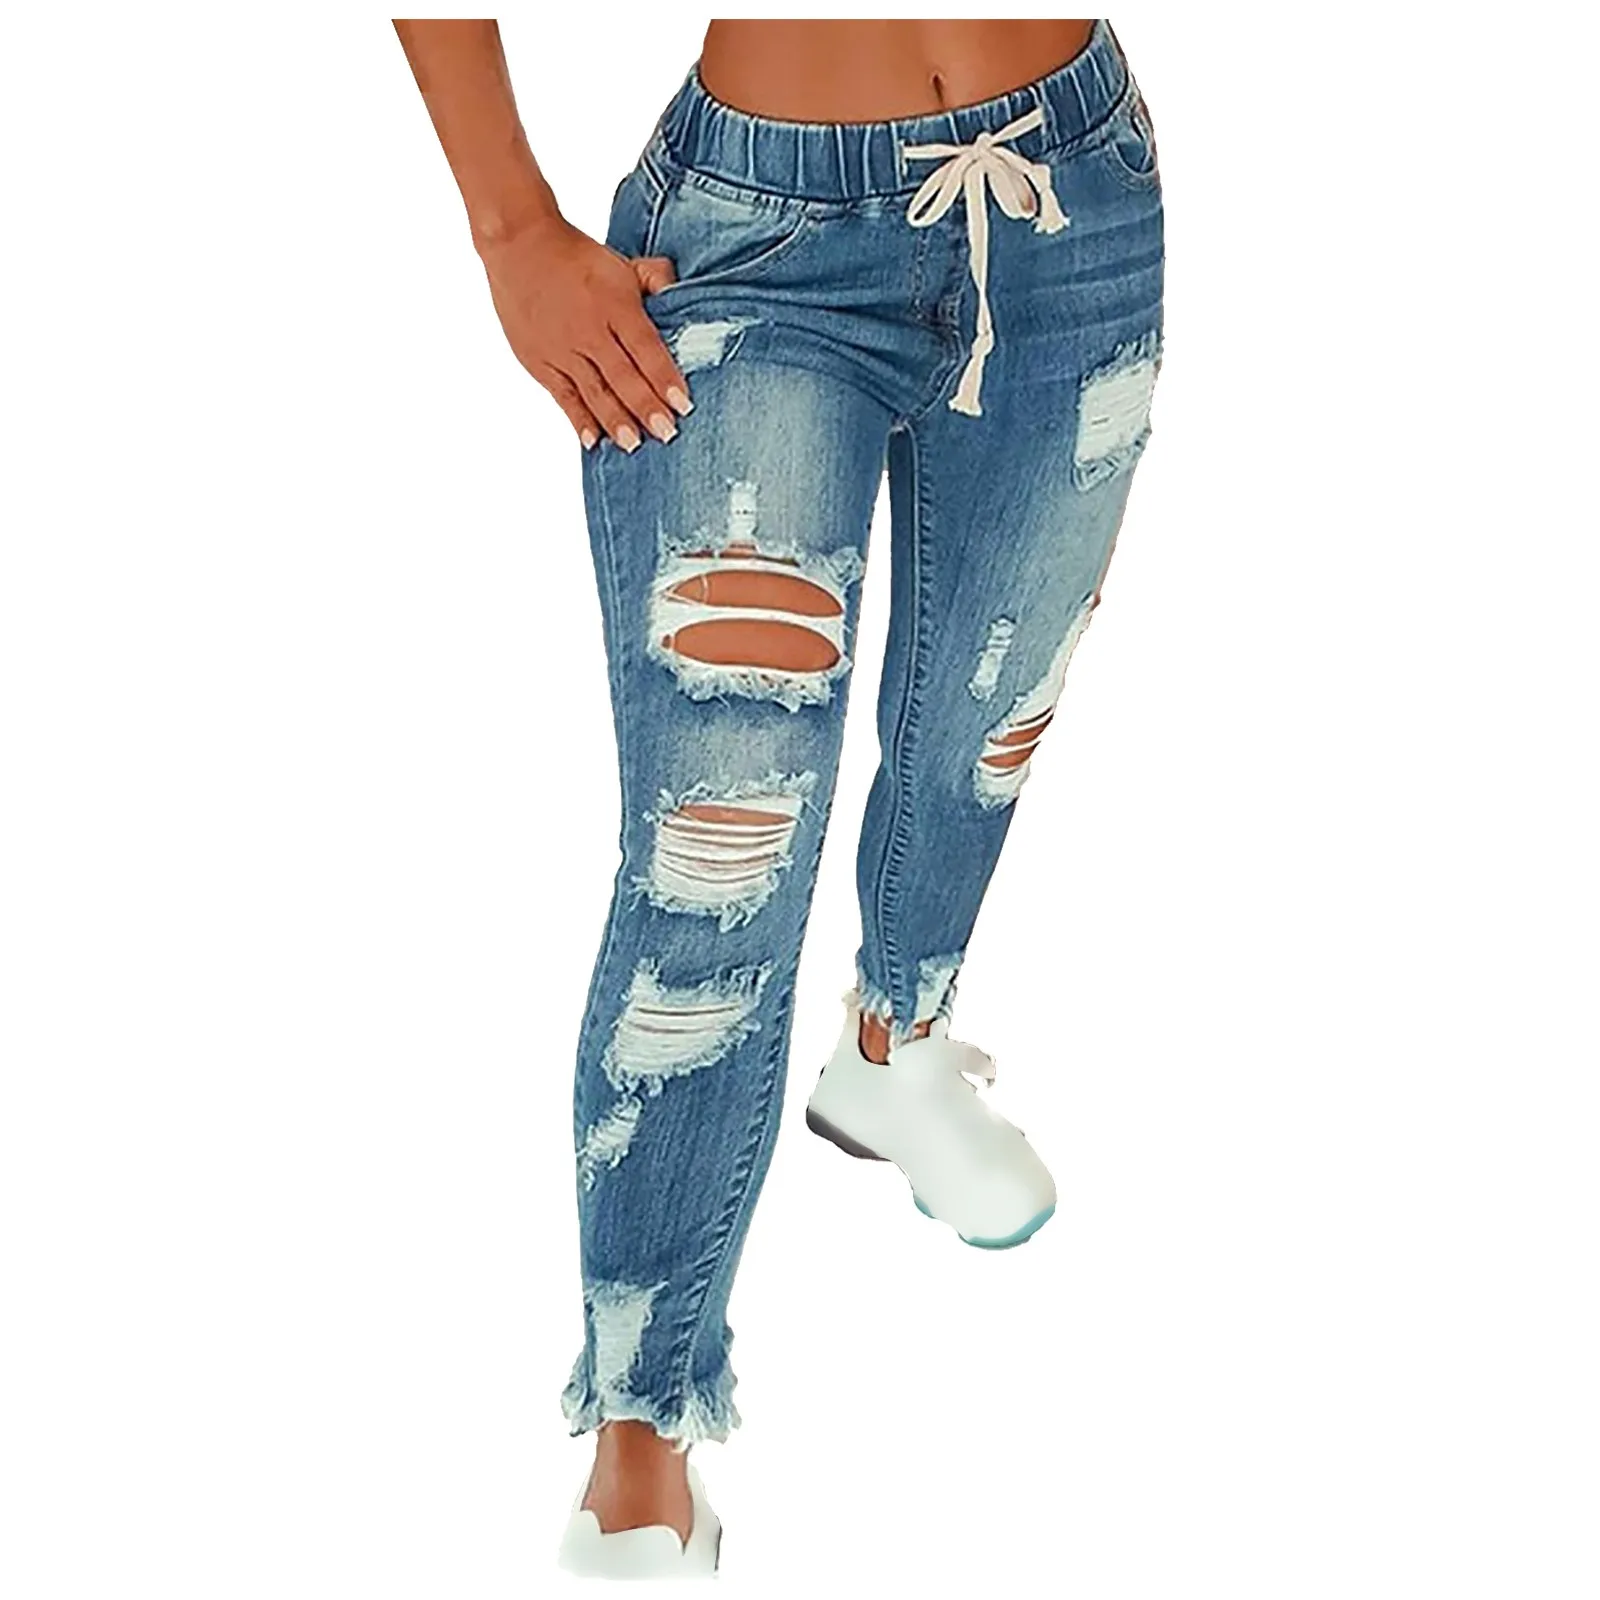 

Women's 2021 New Fashion Casual Solid Color Holes Excoriation Pocket Drawstring High-Waisted Slimming Jeans Pencil Long Trousers